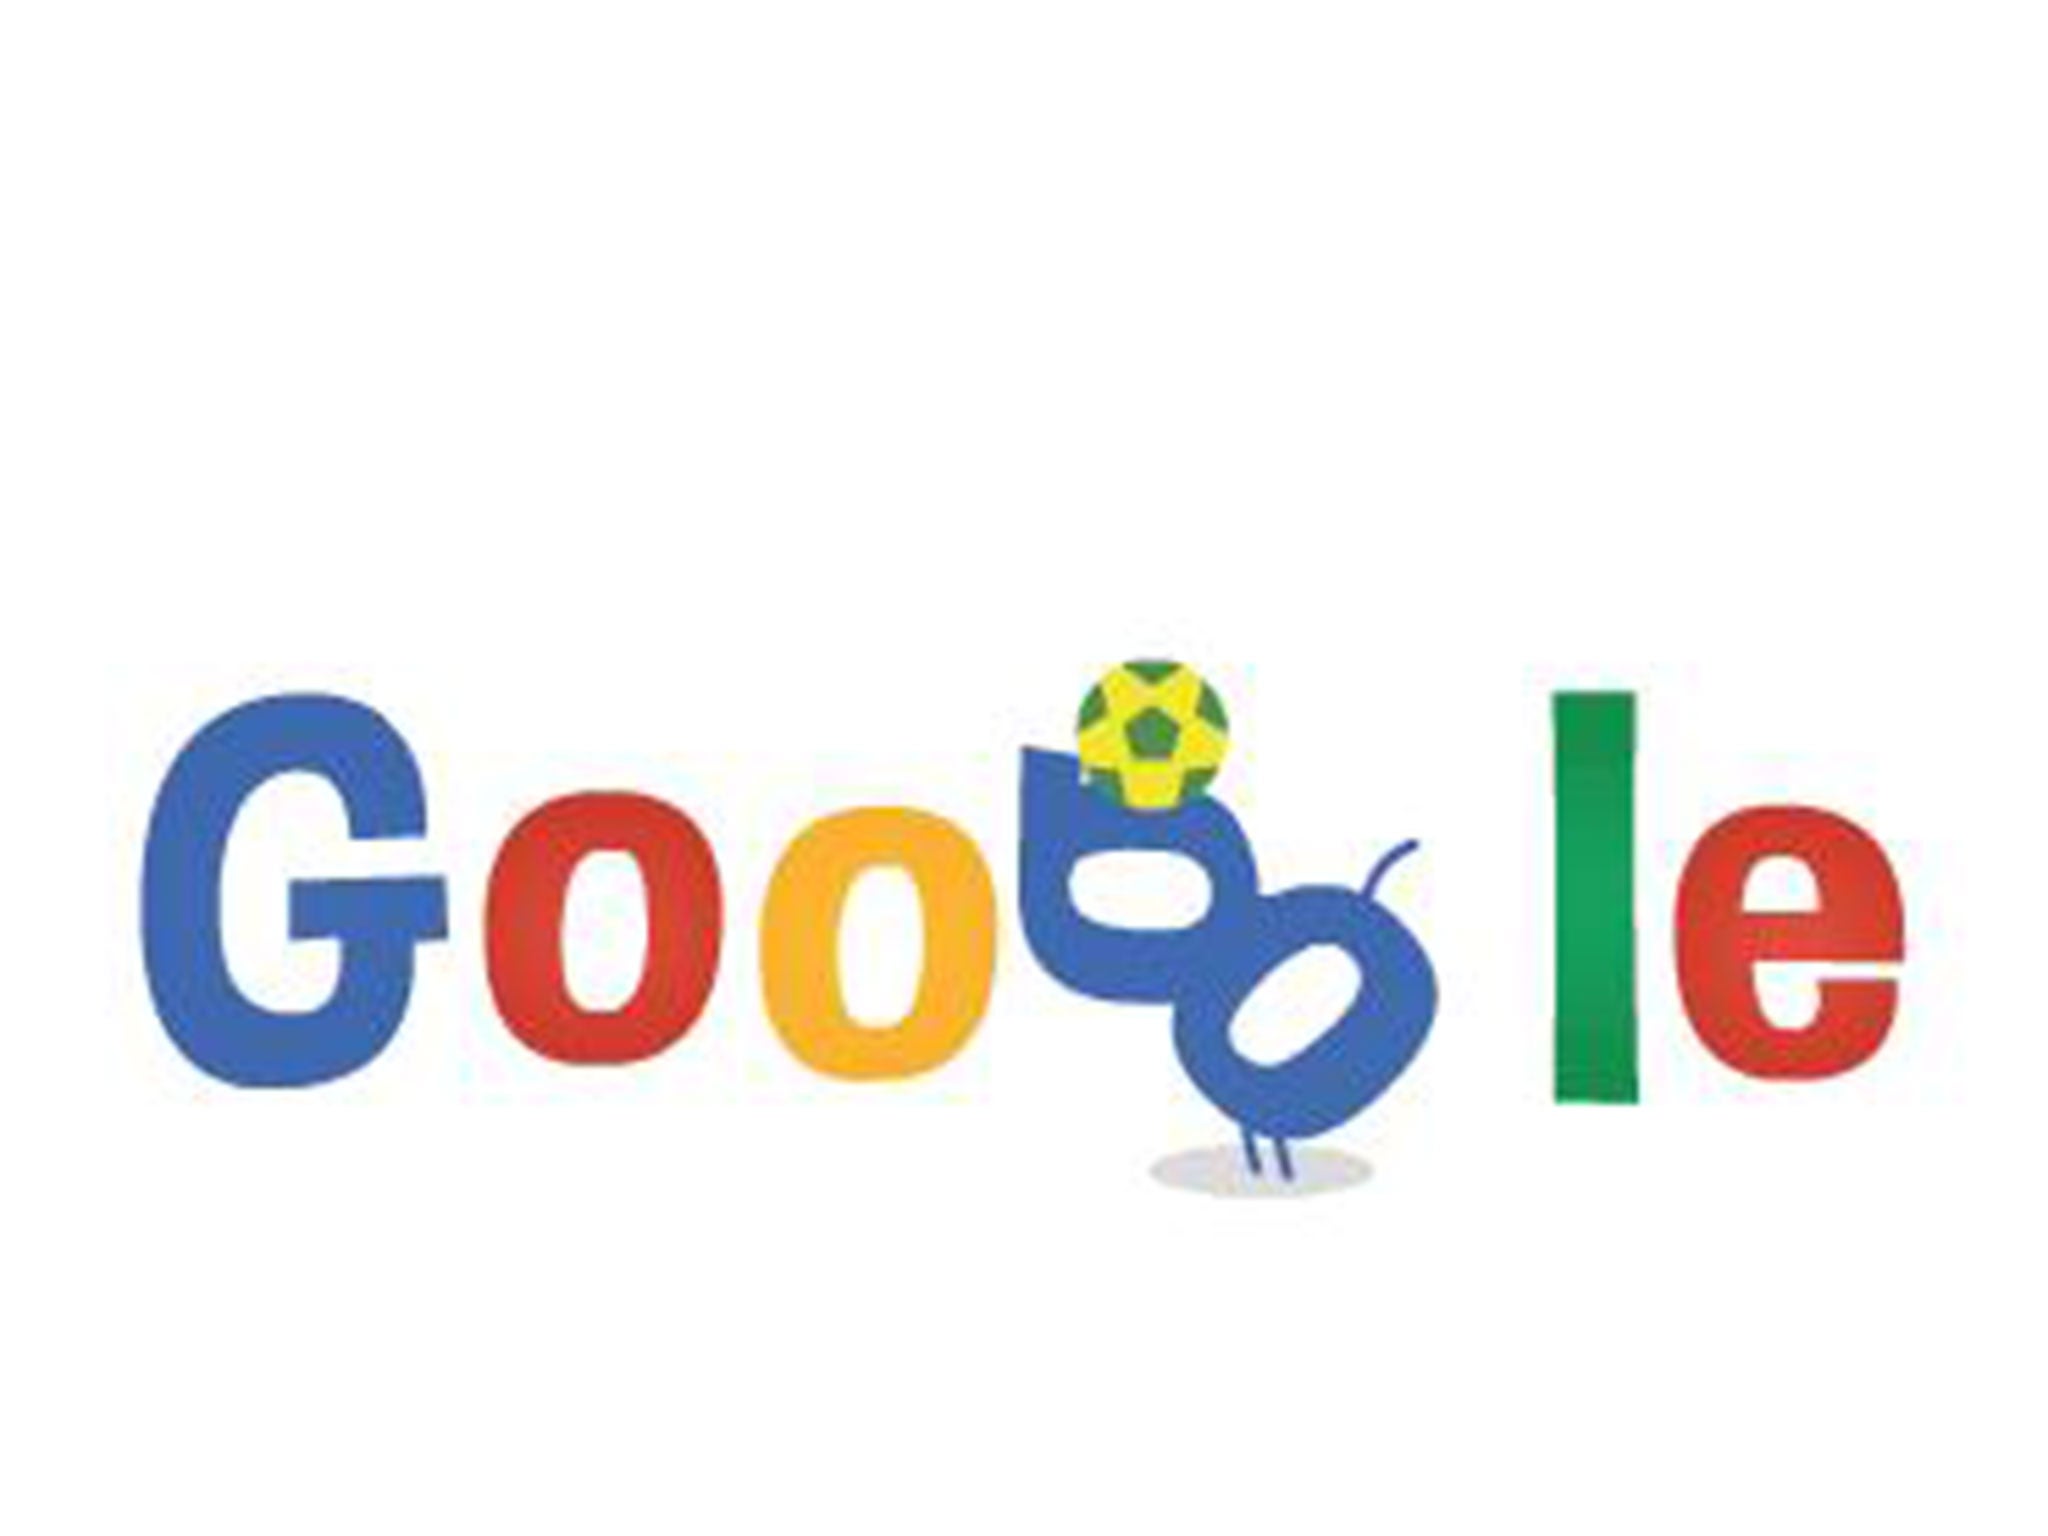 19 June 2014: Google celebrates the eighth day of the 2014 world cup with an animated doodle